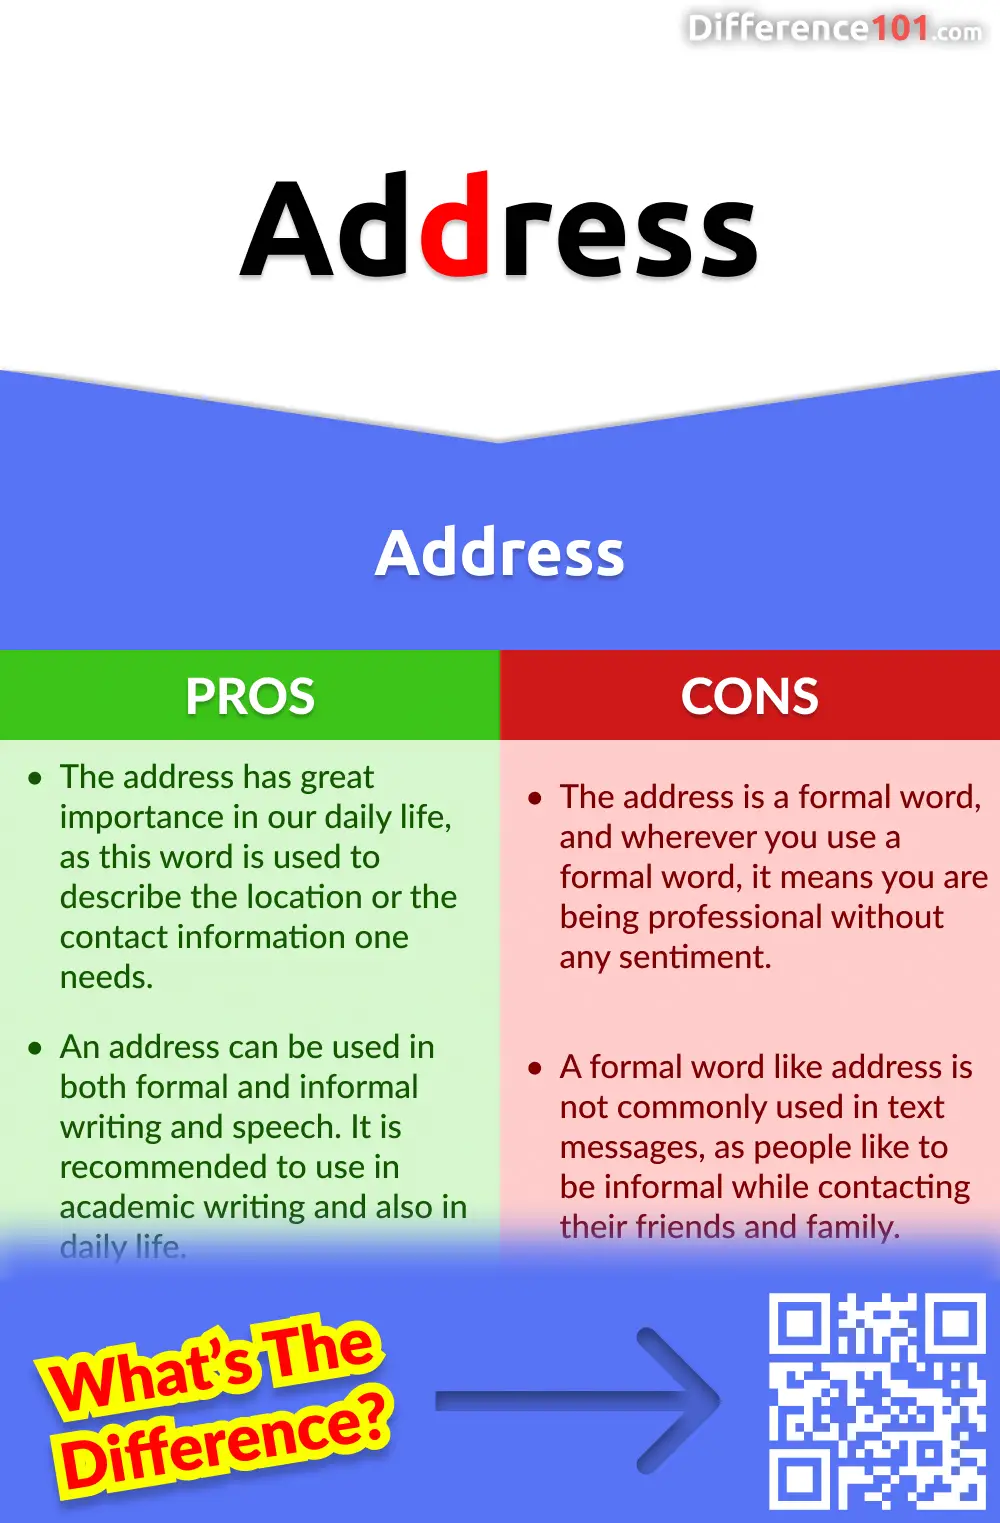 Address Pros and Cons